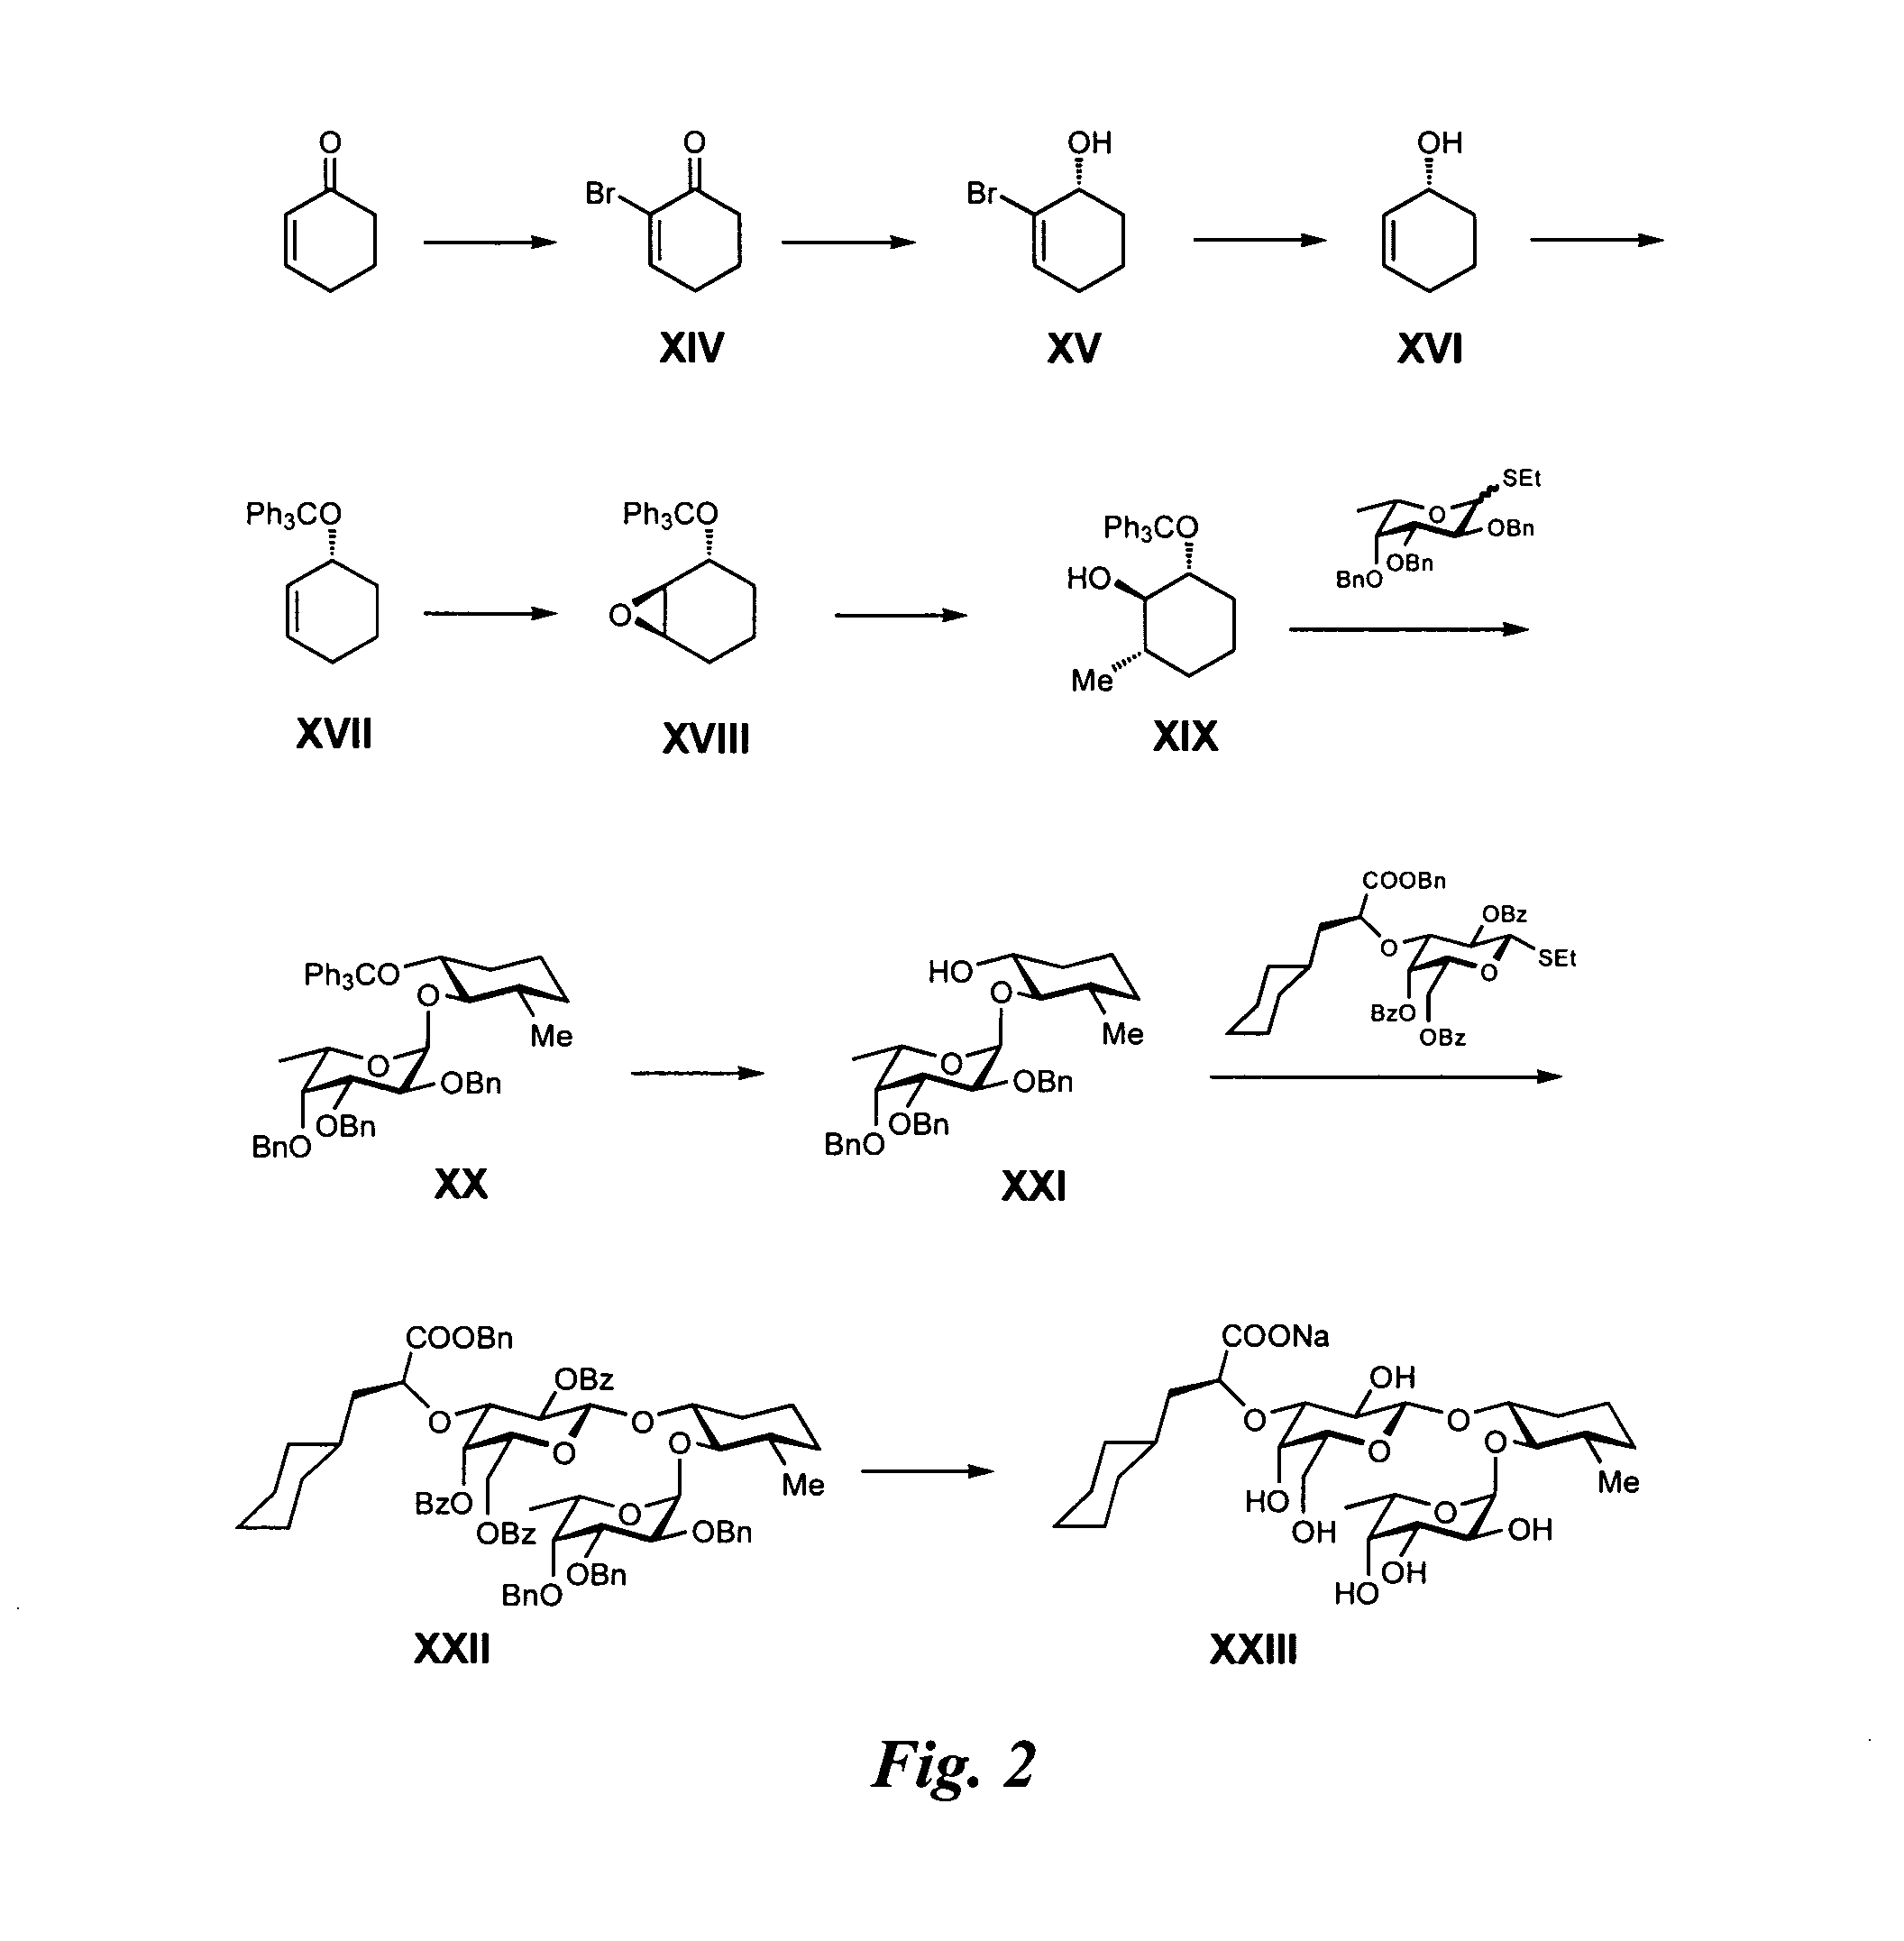 Methods of use of glycomimetics with replacements for hexoses and n-acetyl hexosamines